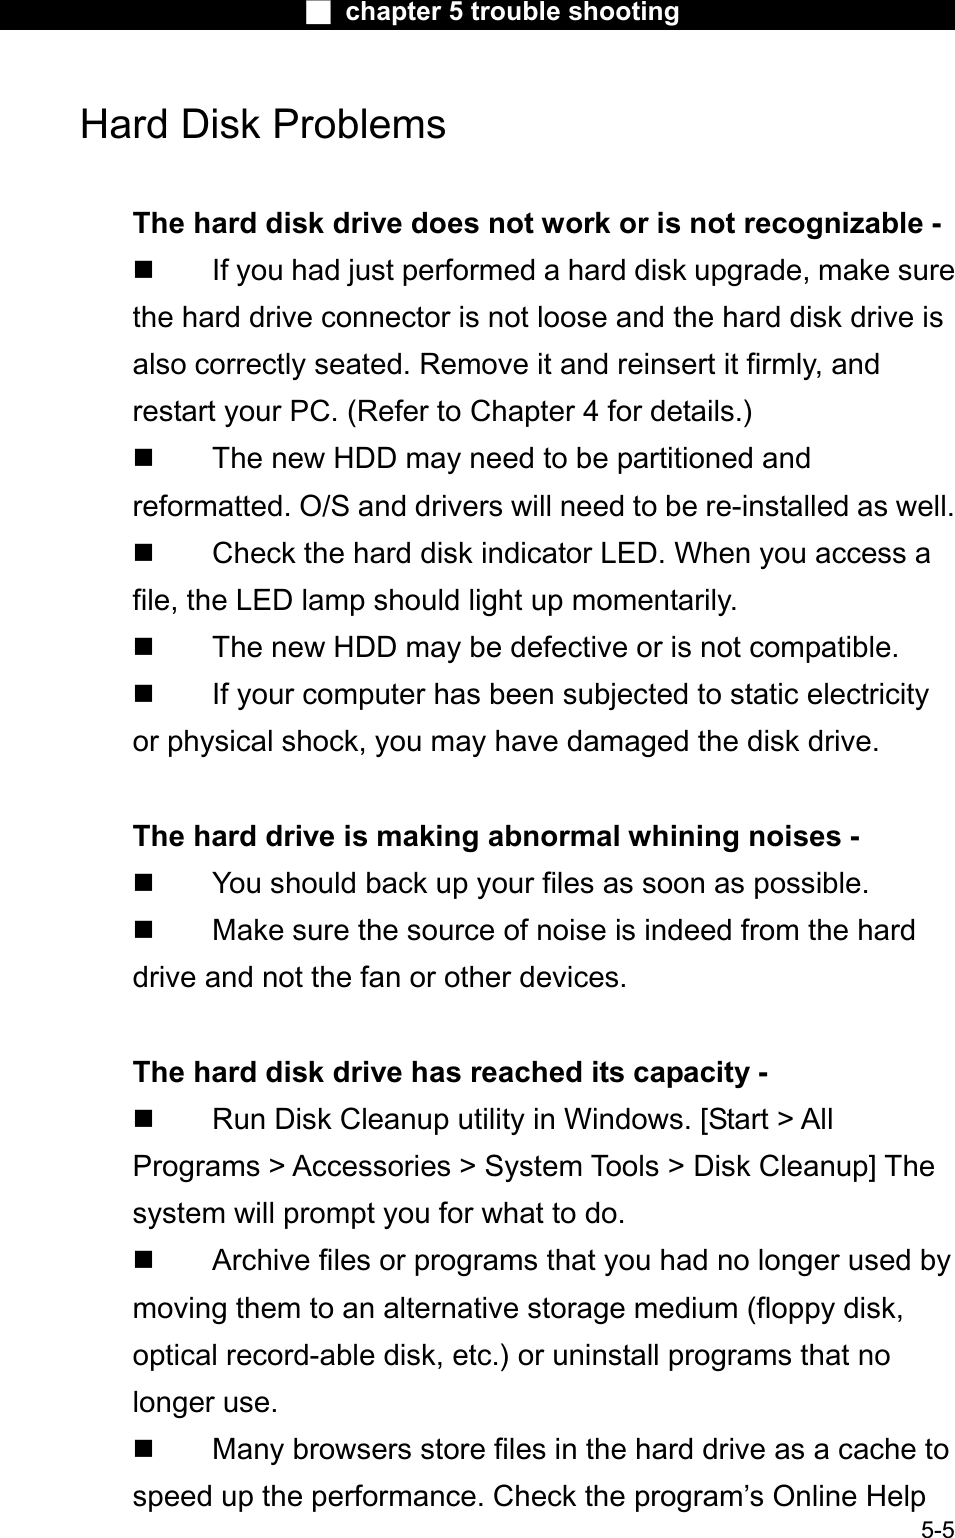 Ϯ chapter 5 trouble shootingHard Disk Problems The hard disk drive does not work or is not recognizable -  If you had just performed a hard disk upgrade, make surethe hard drive connector is not loose and the hard disk drive is also correctly seated. Remove it and reinsert it firmly, and restart your PC. (Refer to Chapter 4 for details.) The new HDD may need to be partitioned and reformatted. O/S and drivers will need to be re-installed as well.  Check the hard disk indicator LED. When you access afile, the LED lamp should light up momentarily. The new HDD may be defective or is not compatible. If your computer has been subjected to static electricityor physical shock, you may have damaged the disk drive. The hard drive is making abnormal whining noises -  You should back up your files as soon as possible. Make sure the source of noise is indeed from the hard drive and not the fan or other devices. The hard disk drive has reached its capacity -  Run Disk Cleanup utility in Windows. [Start &gt; AllPrograms &gt; Accessories &gt; System Tools &gt; Disk Cleanup] Thesystem will prompt you for what to do.  Archive files or programs that you had no longer used by moving them to an alternative storage medium (floppy disk, optical record-able disk, etc.) or uninstall programs that no longer use. 5-5 Many browsers store files in the hard drive as a cache to speed up the performance. Check the program’s Online Help